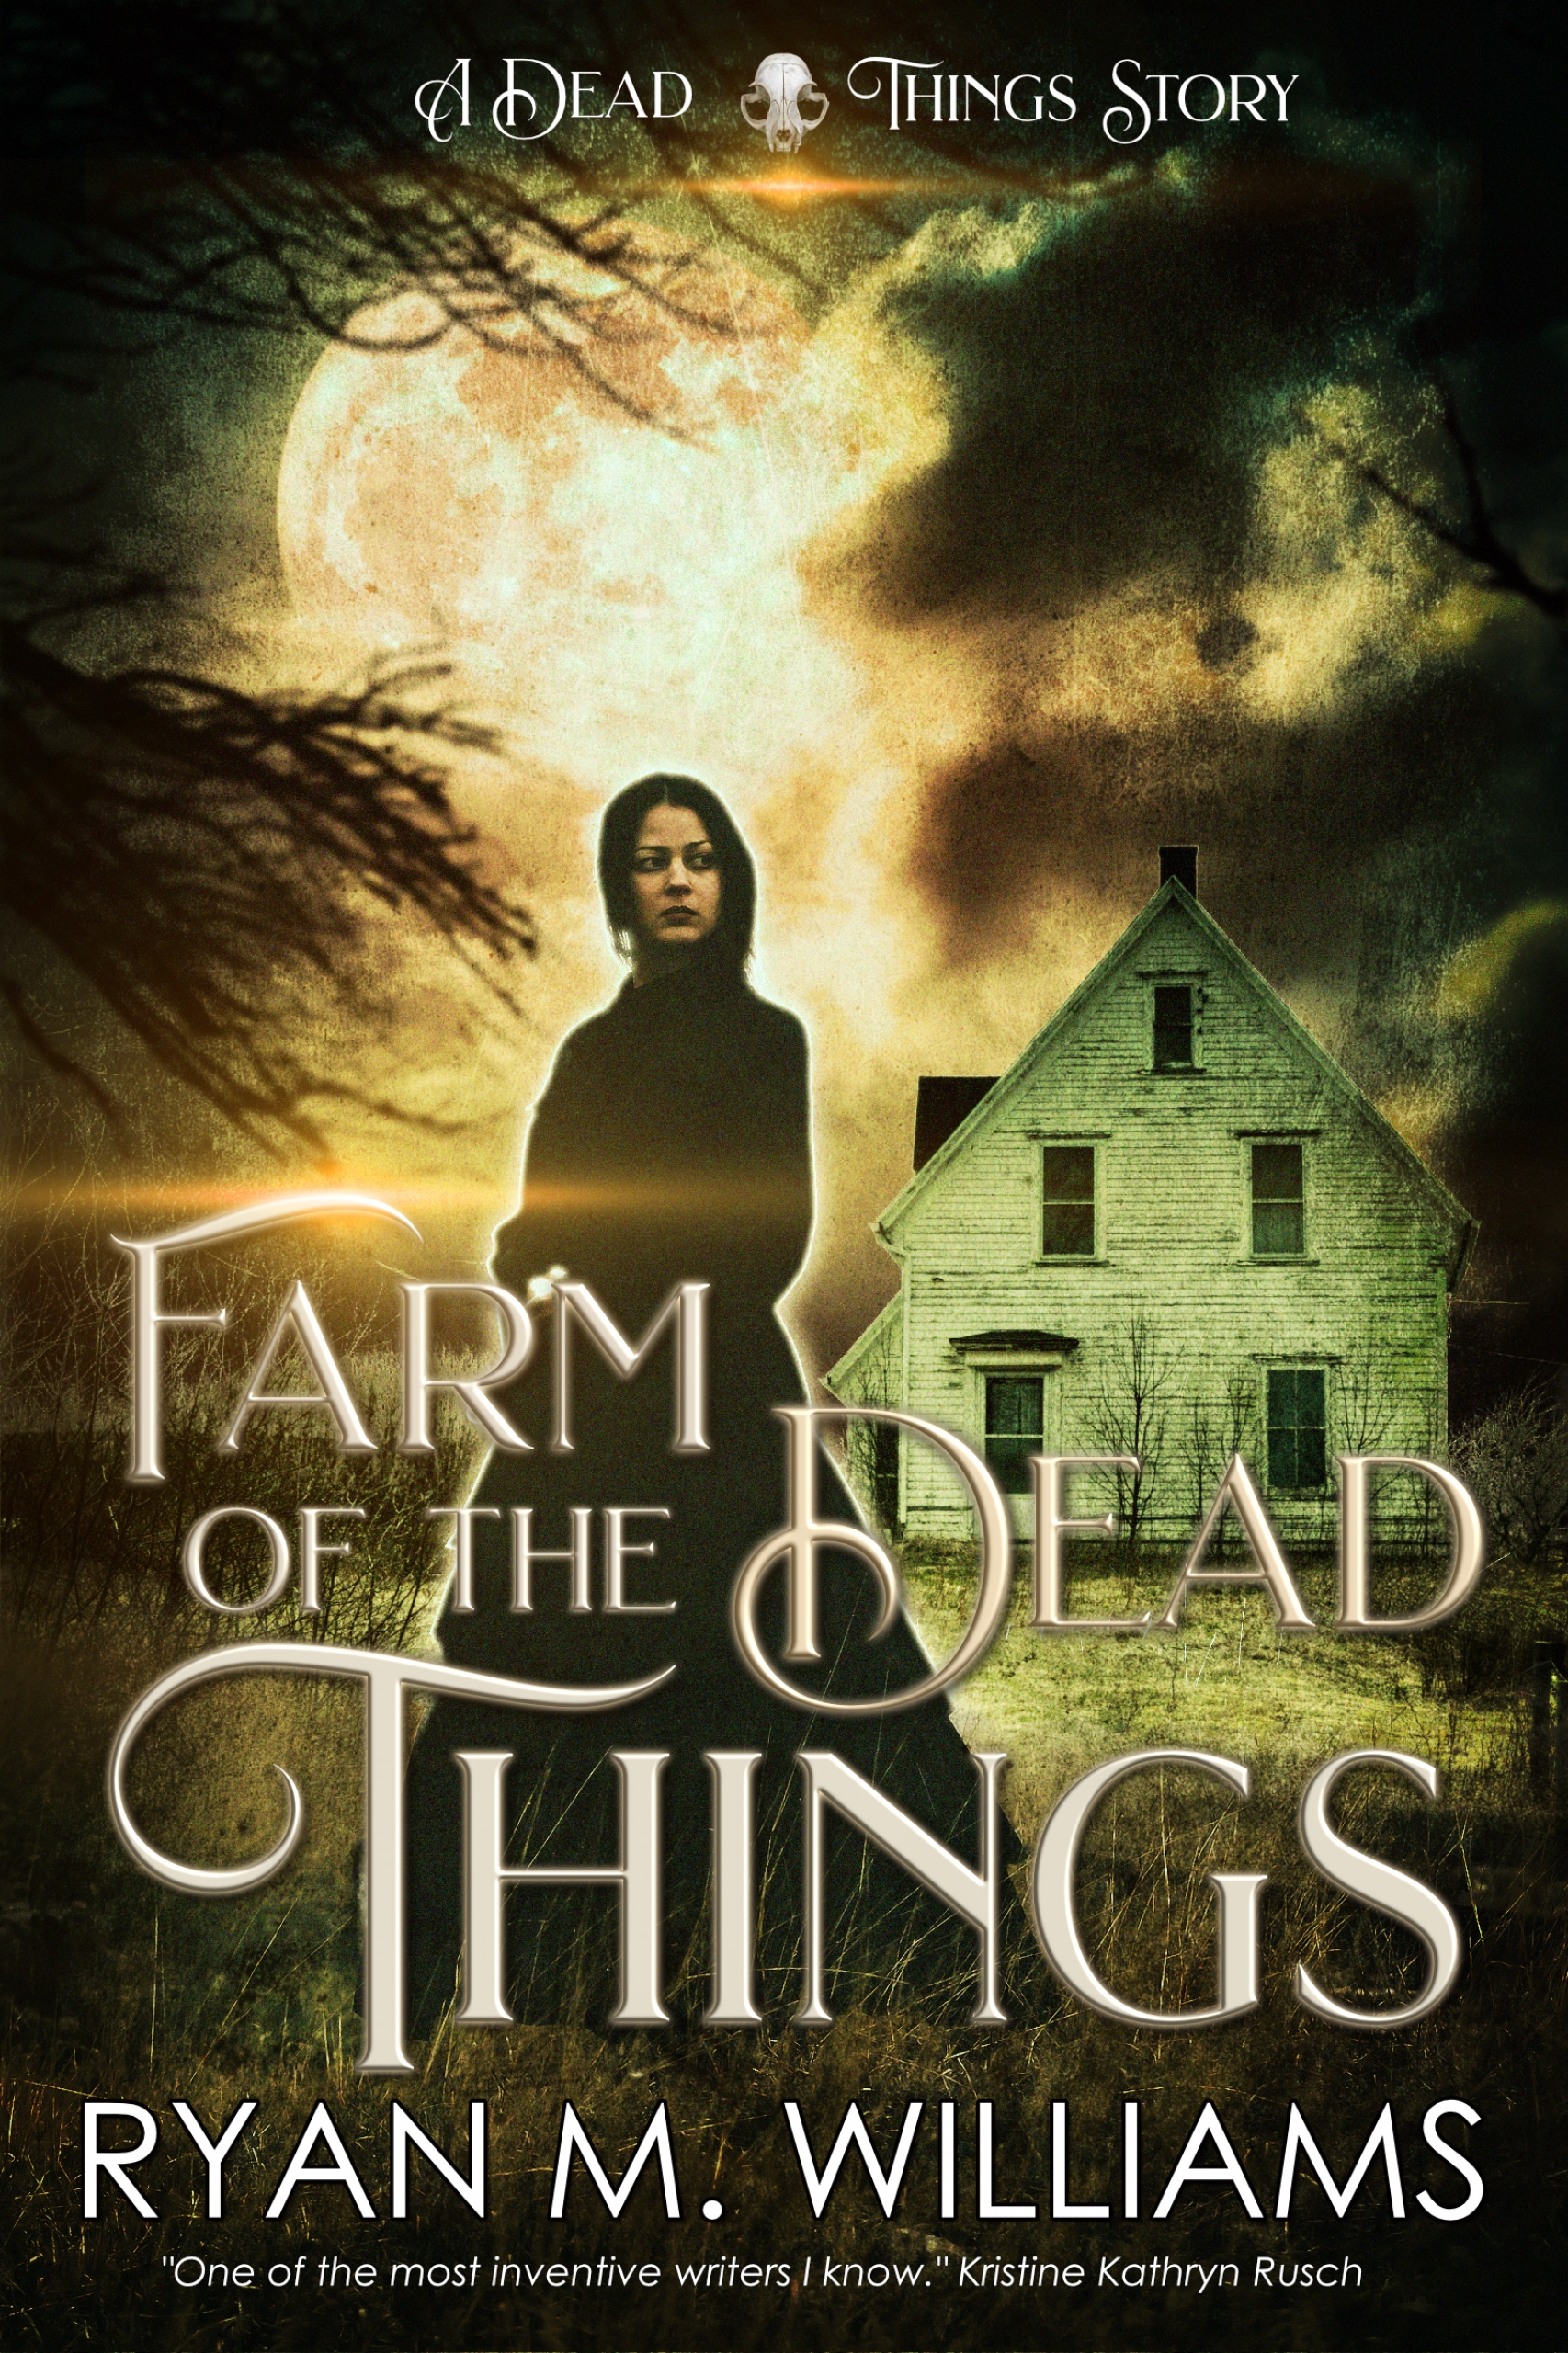 Farm of the Dead Things